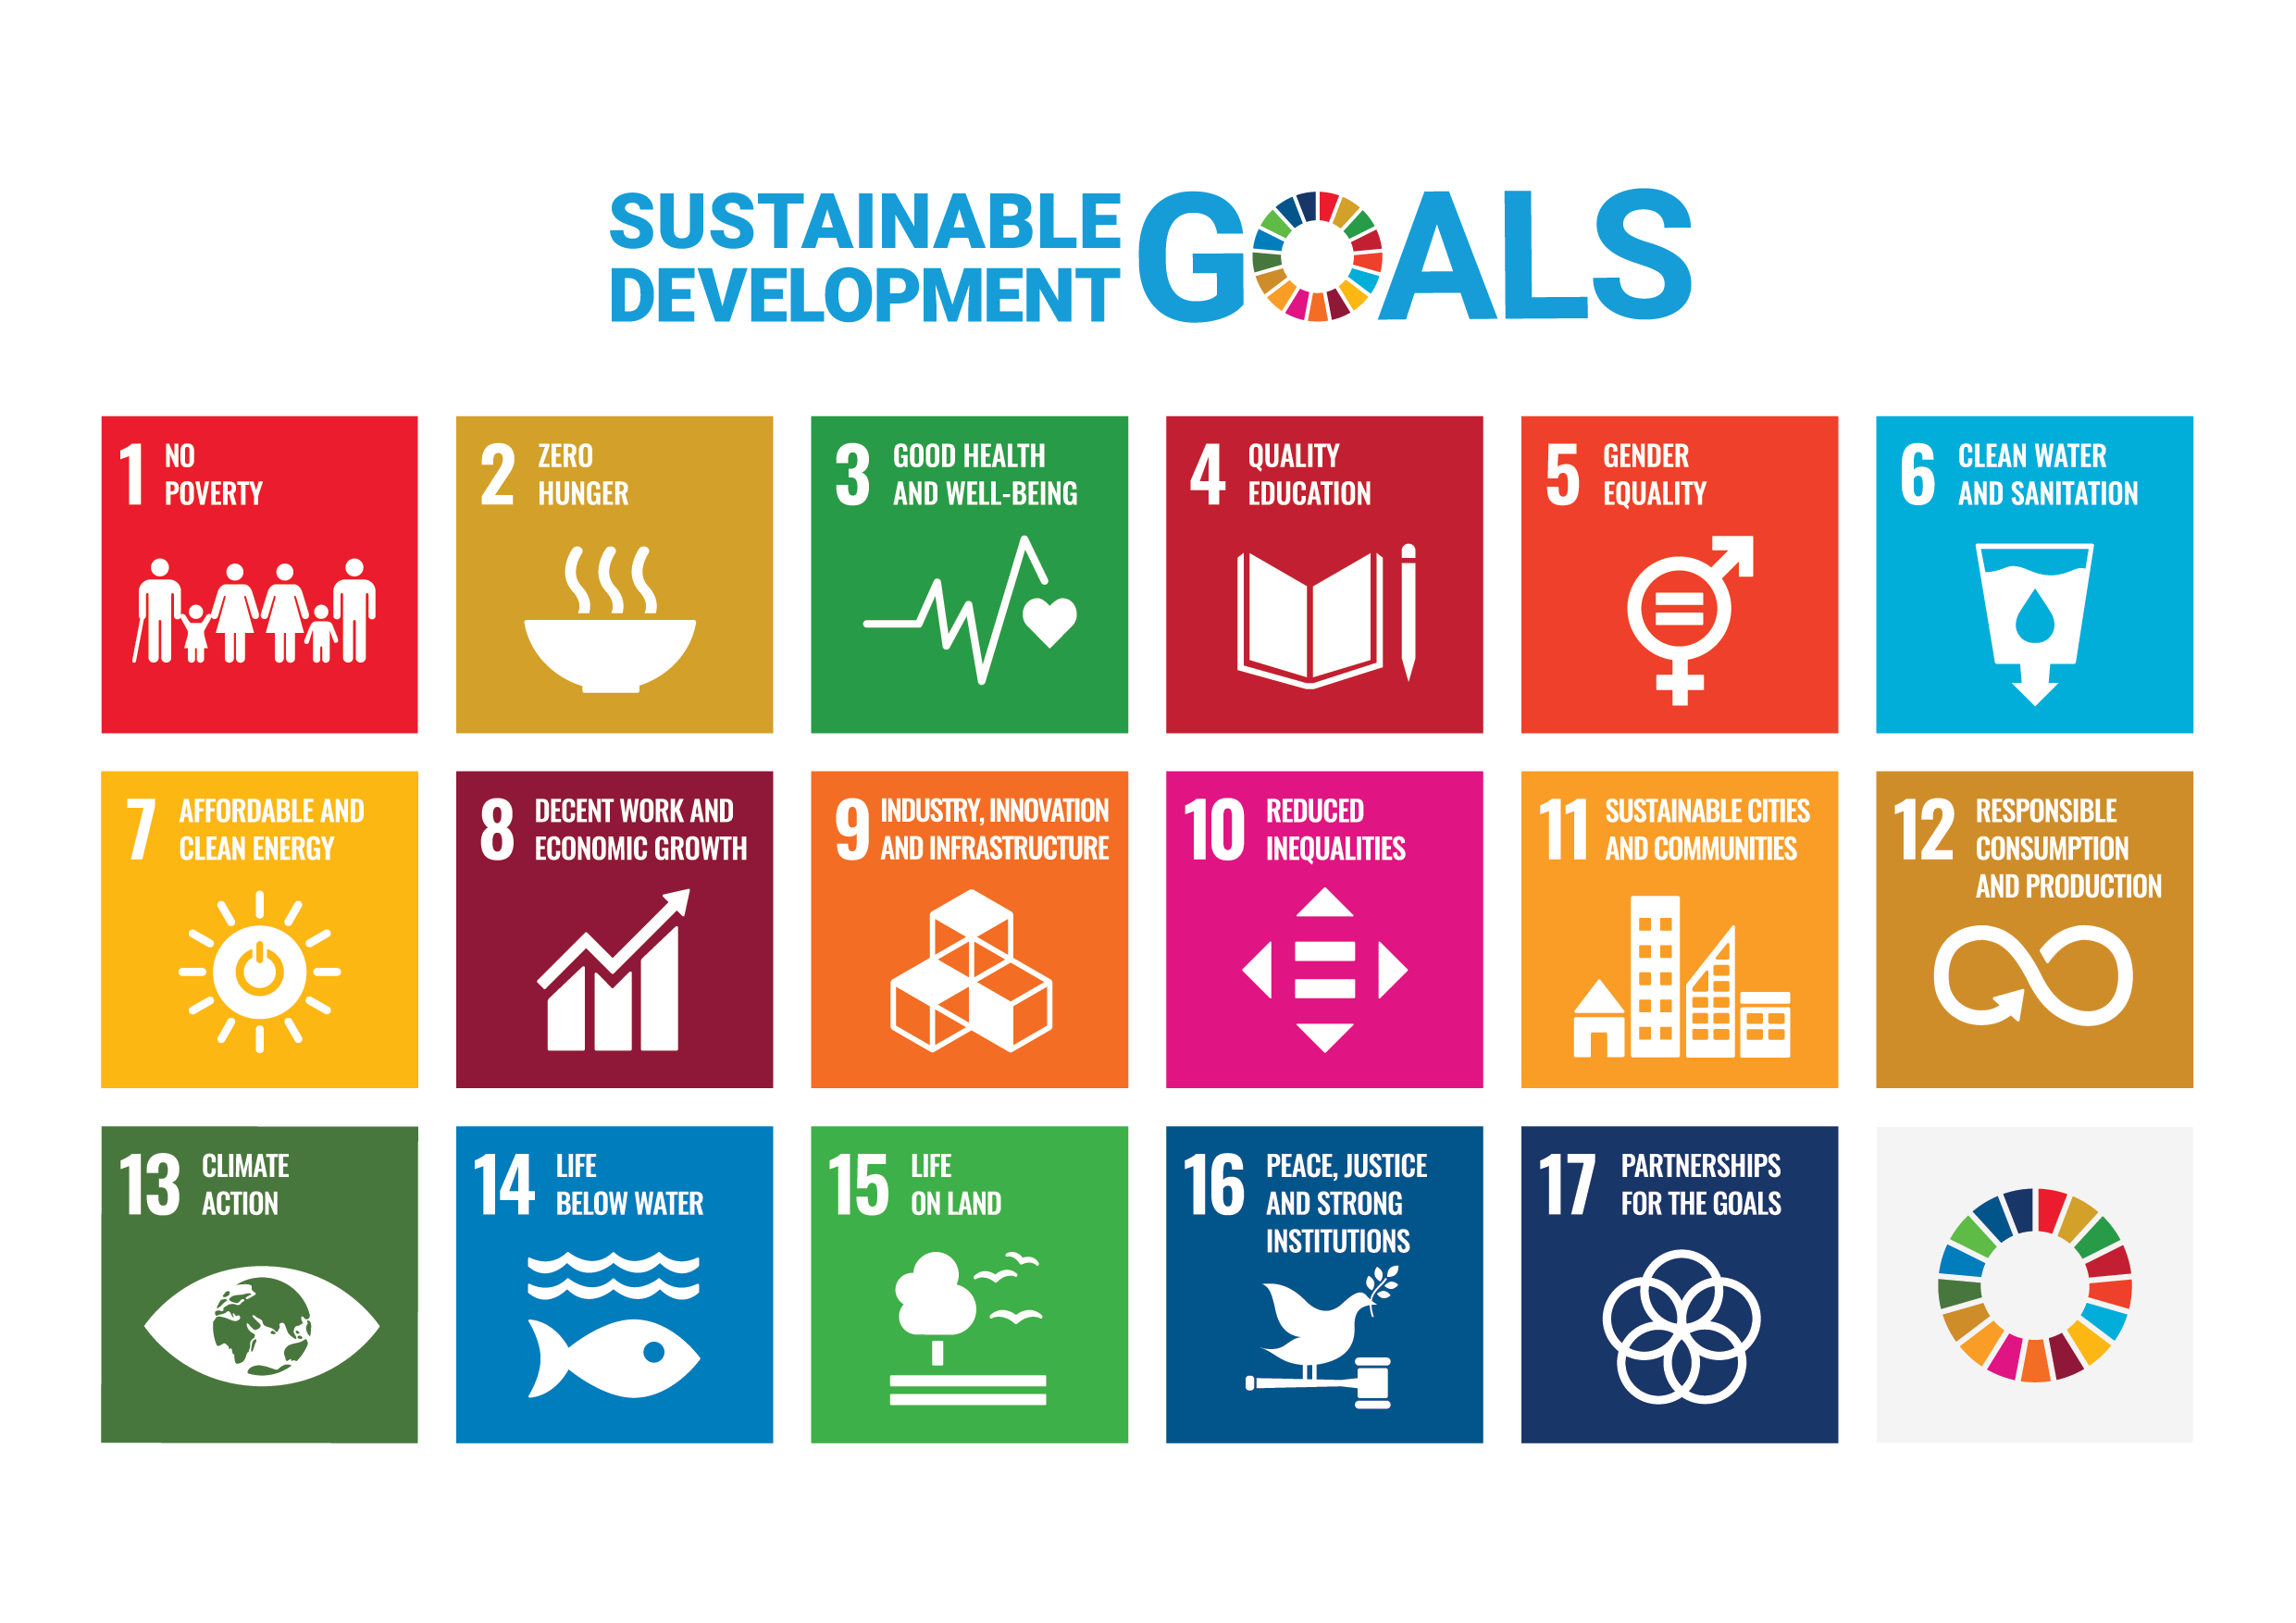 The United Nations' 17 Sustainable Development Goals (SDGs)